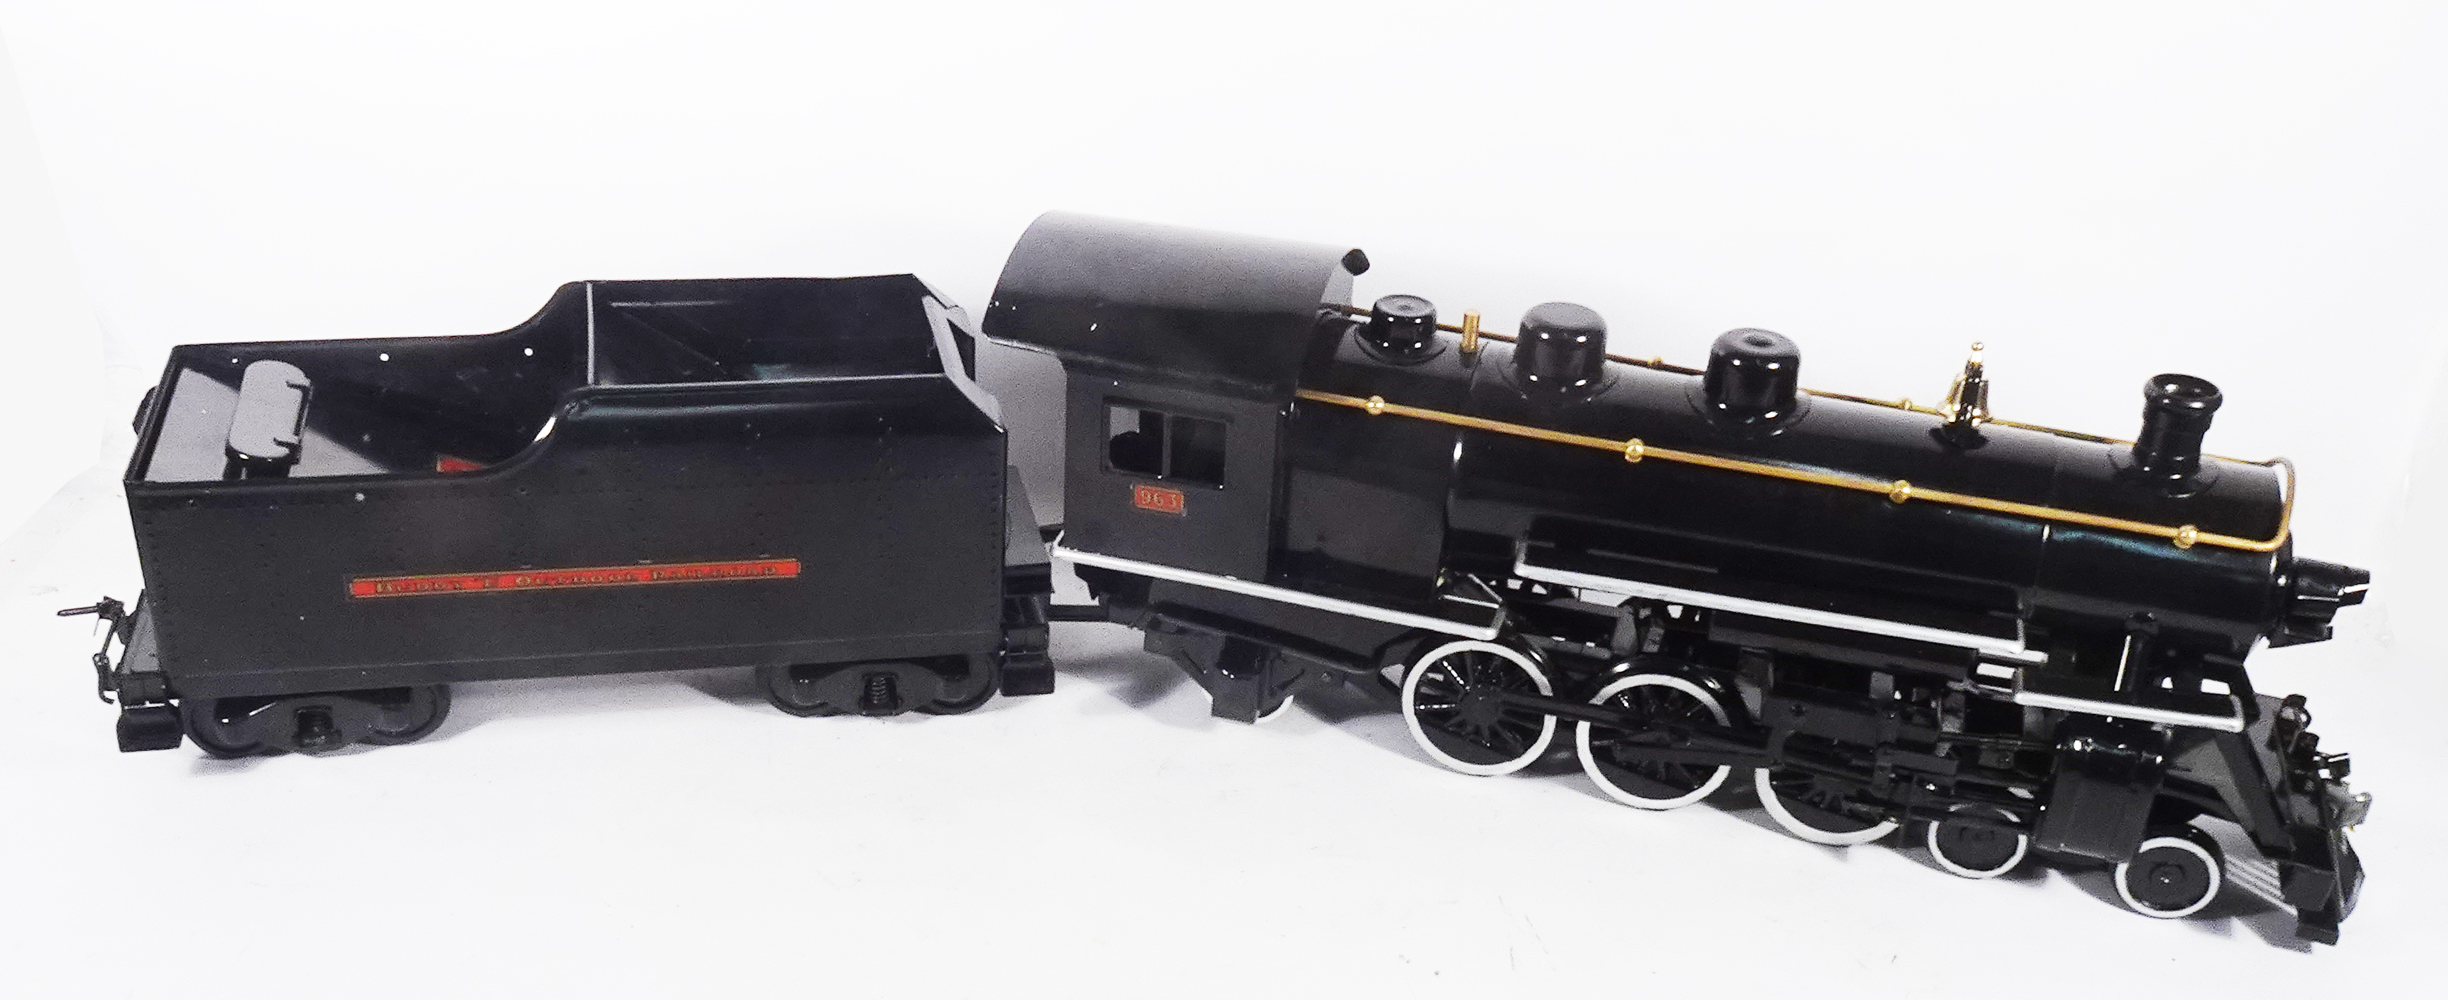 1990s motorized T-Reproduction of Buddy L steam engine and tender, accompanied by what appear to be original boxes. Complete and like new condition. Est. $500-$1,000. Image courtesy of Stephenson’s Auction